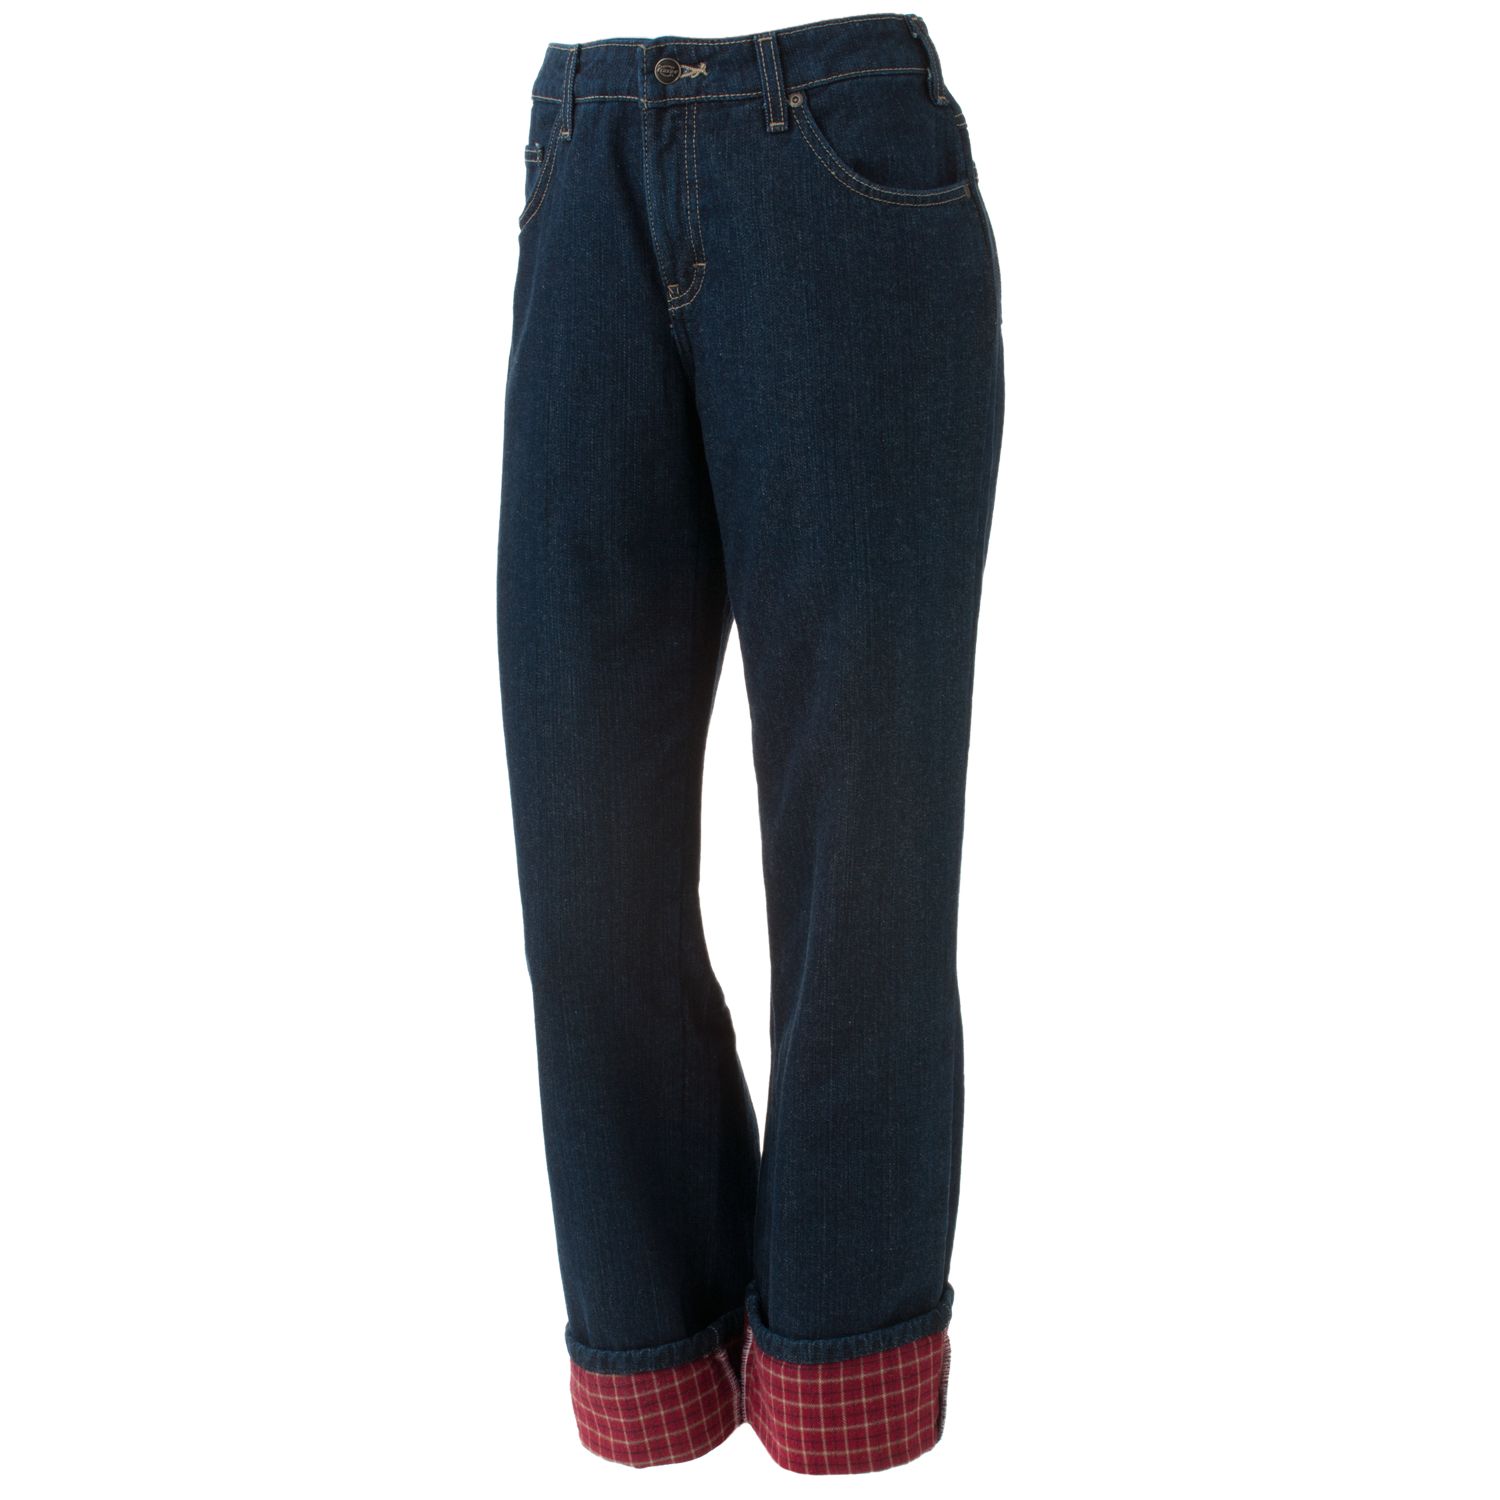 women's insulated blue jeans